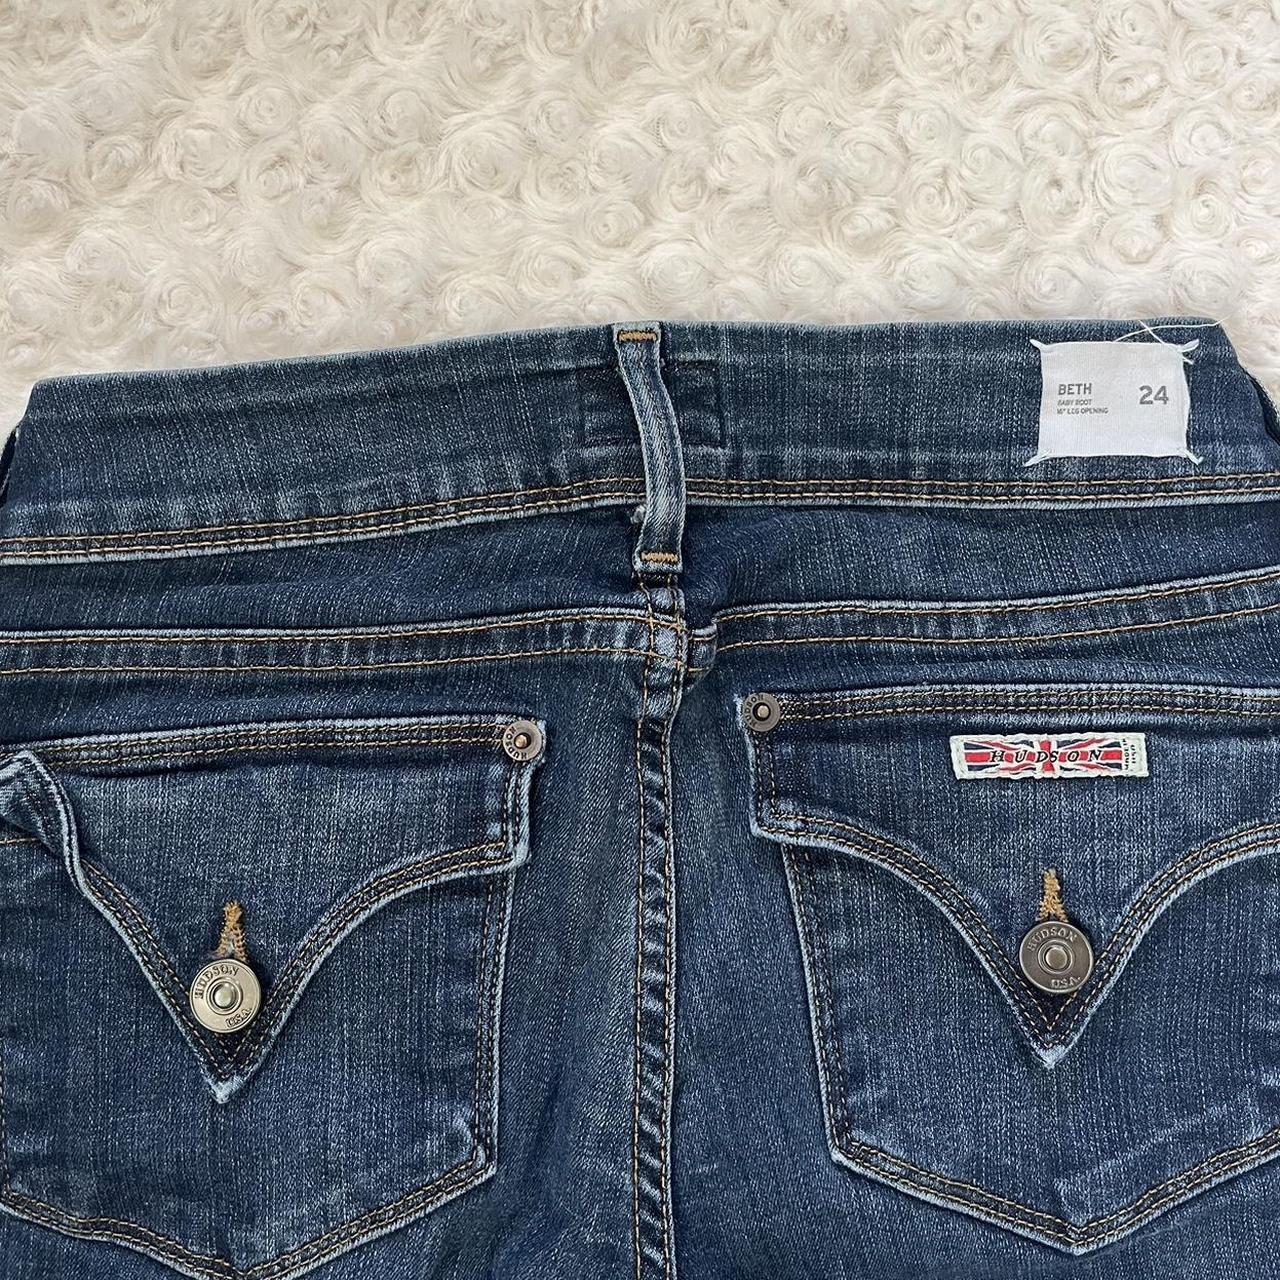 Hudson baby boot cut jeans, it’s on the smaller side... - Depop